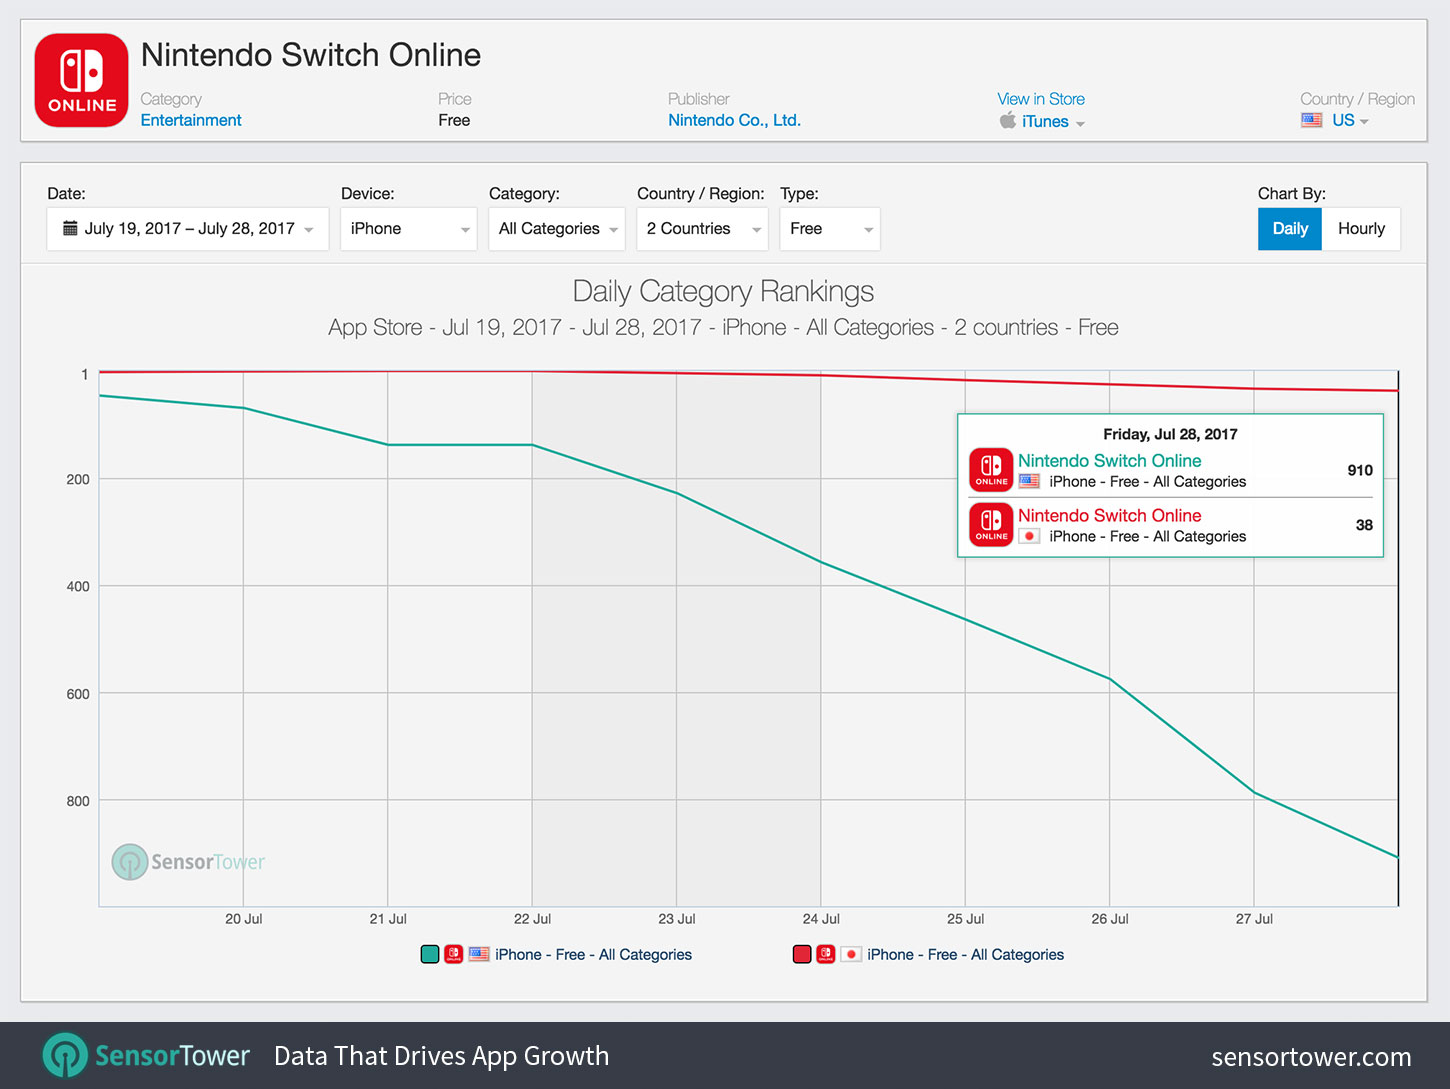 Nintendo Switch Online app first 10 days download ranking history on iPhone in the U.S. and Japan